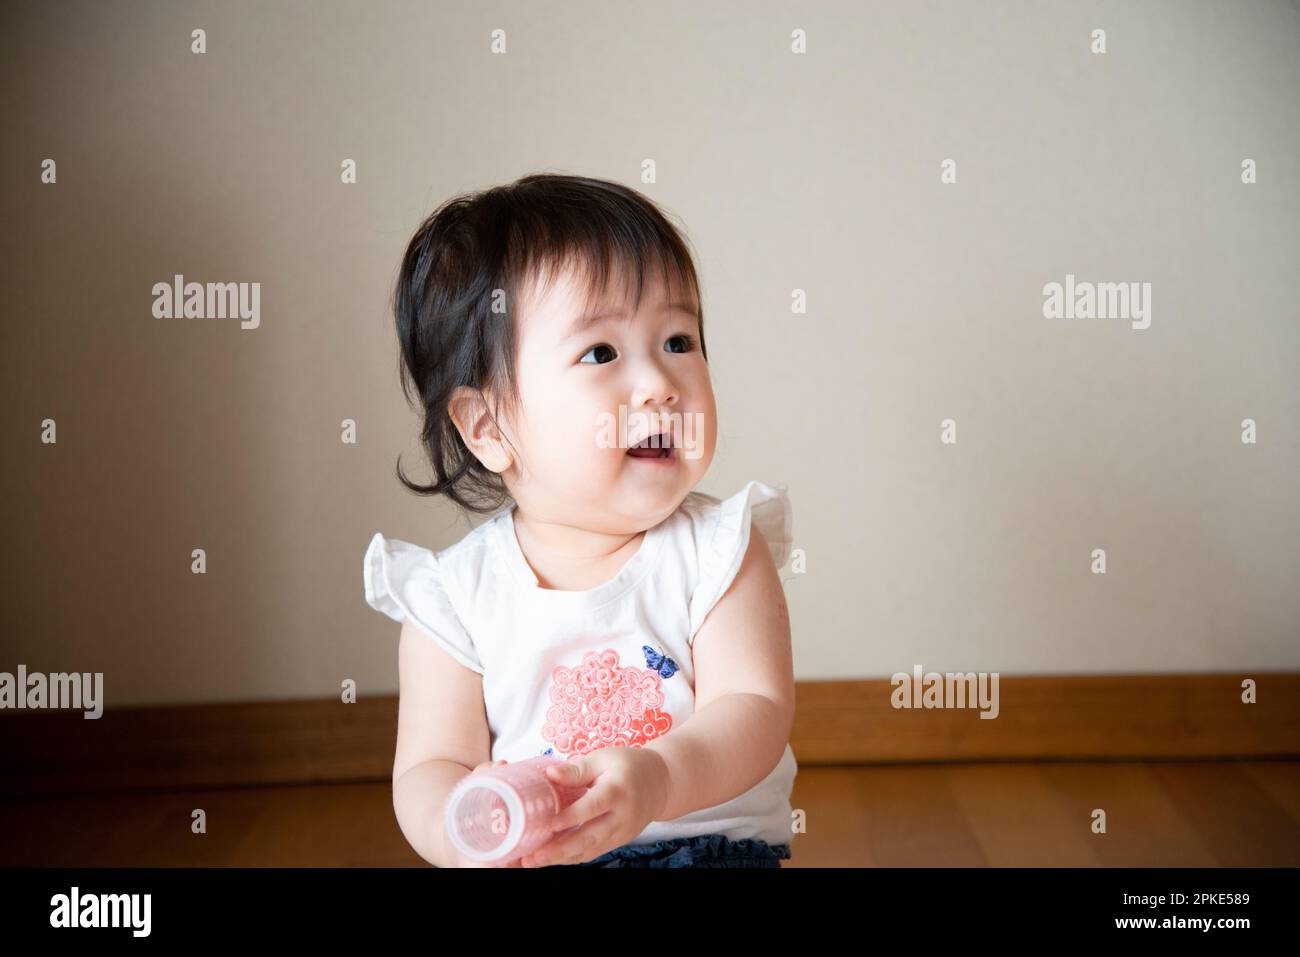 Baby laughing Stock Photo